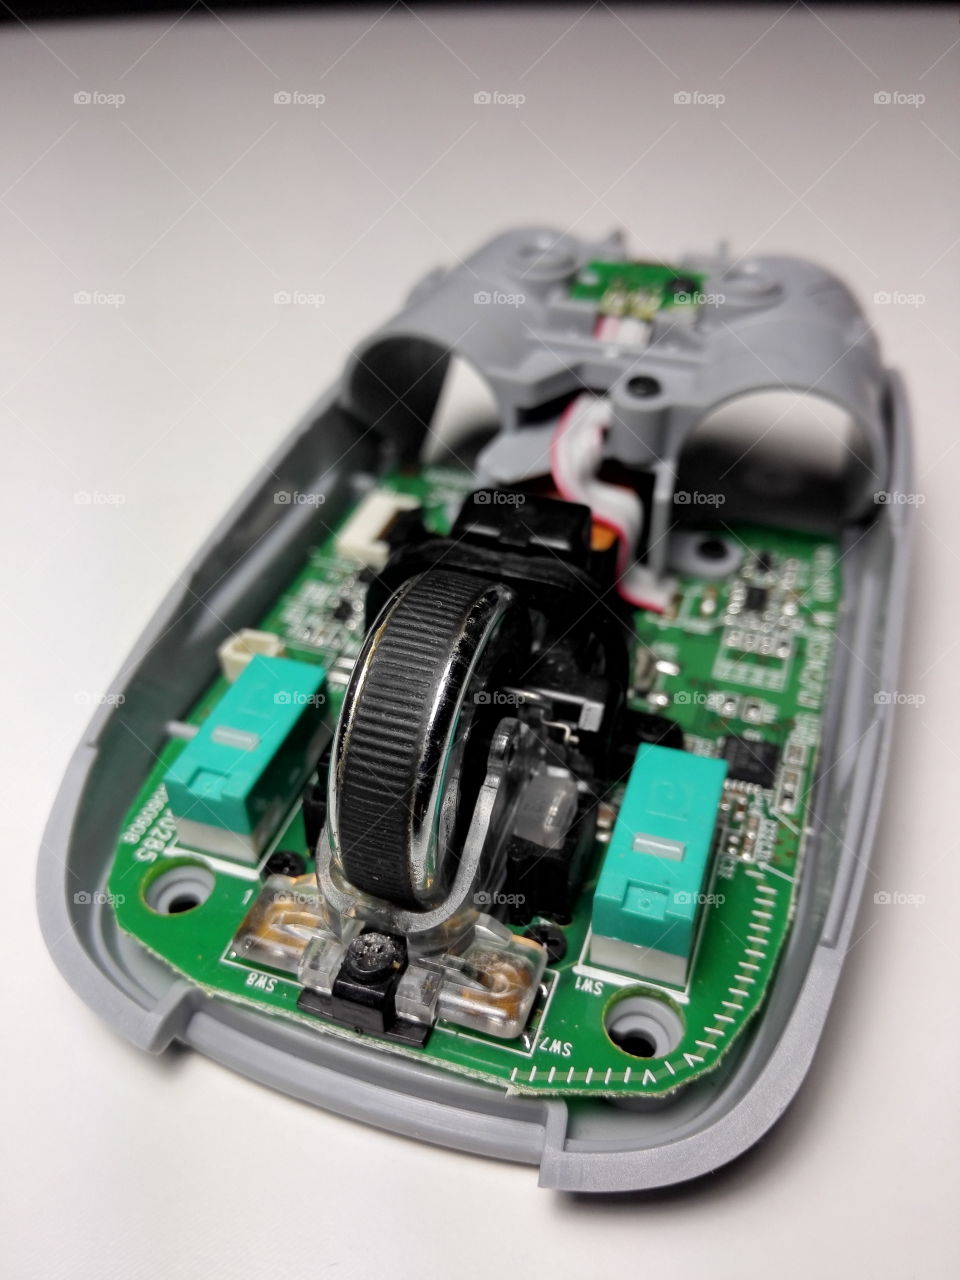 Inside the computer mouse.